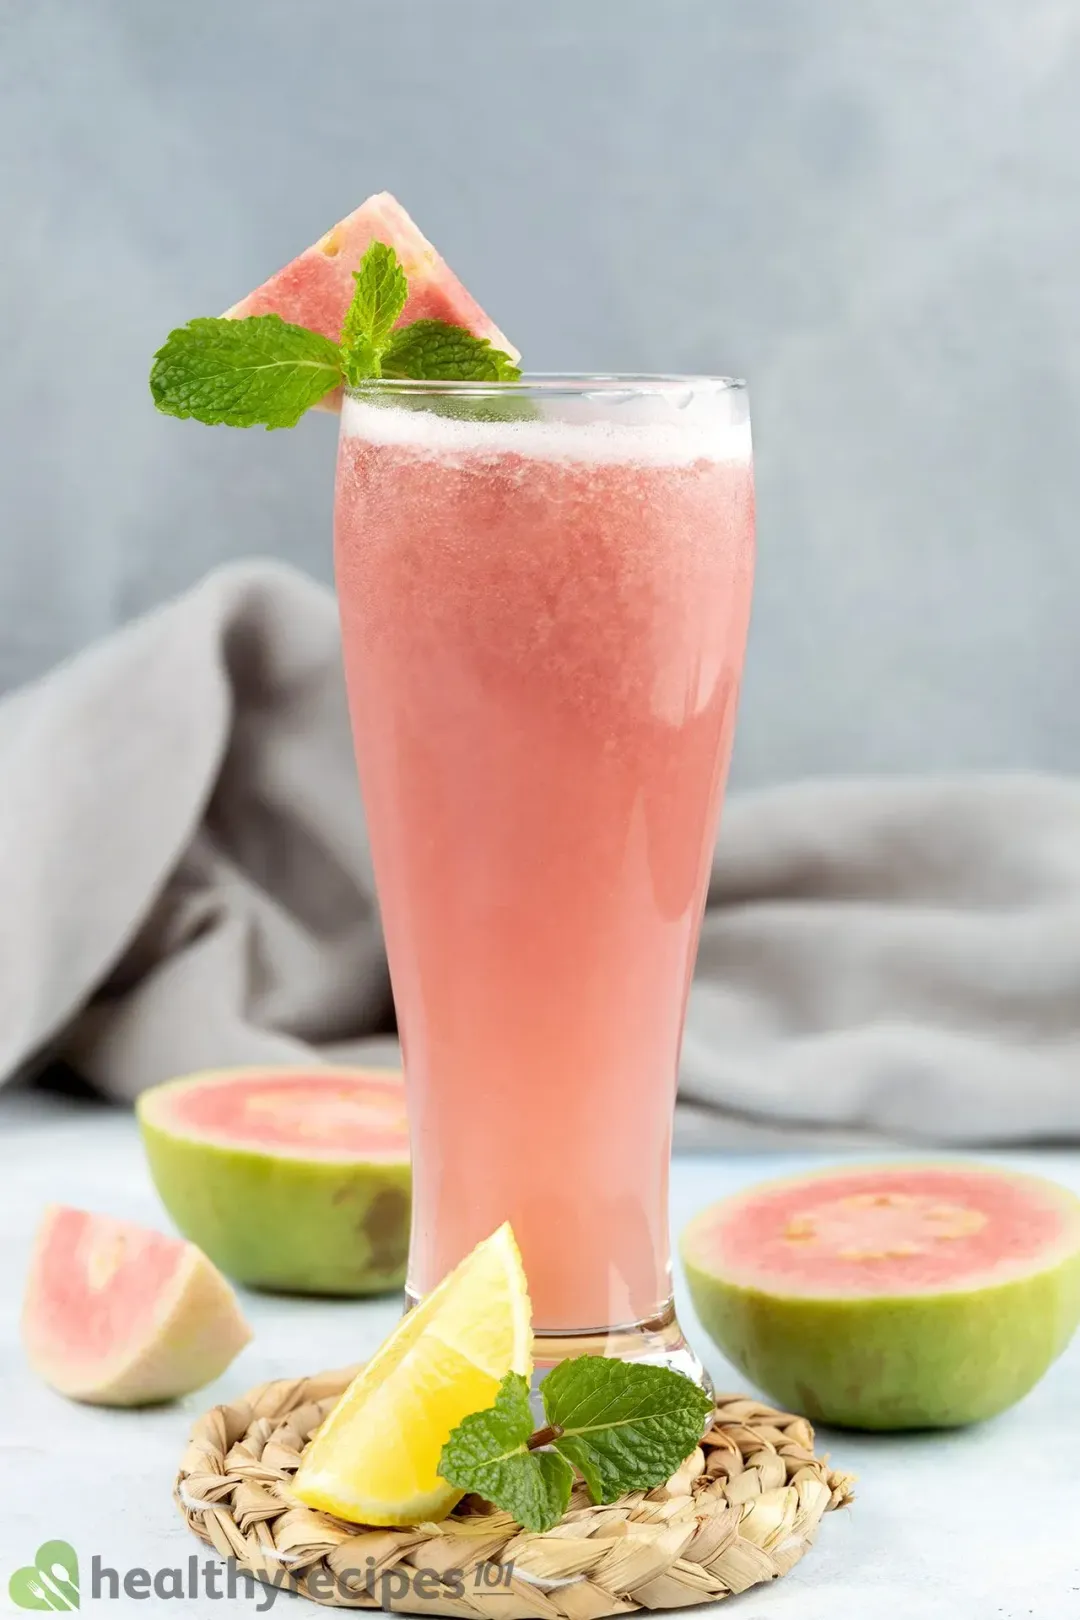 A tall and slim glass of guava juice surrounded by guava slices and a lemon wedge